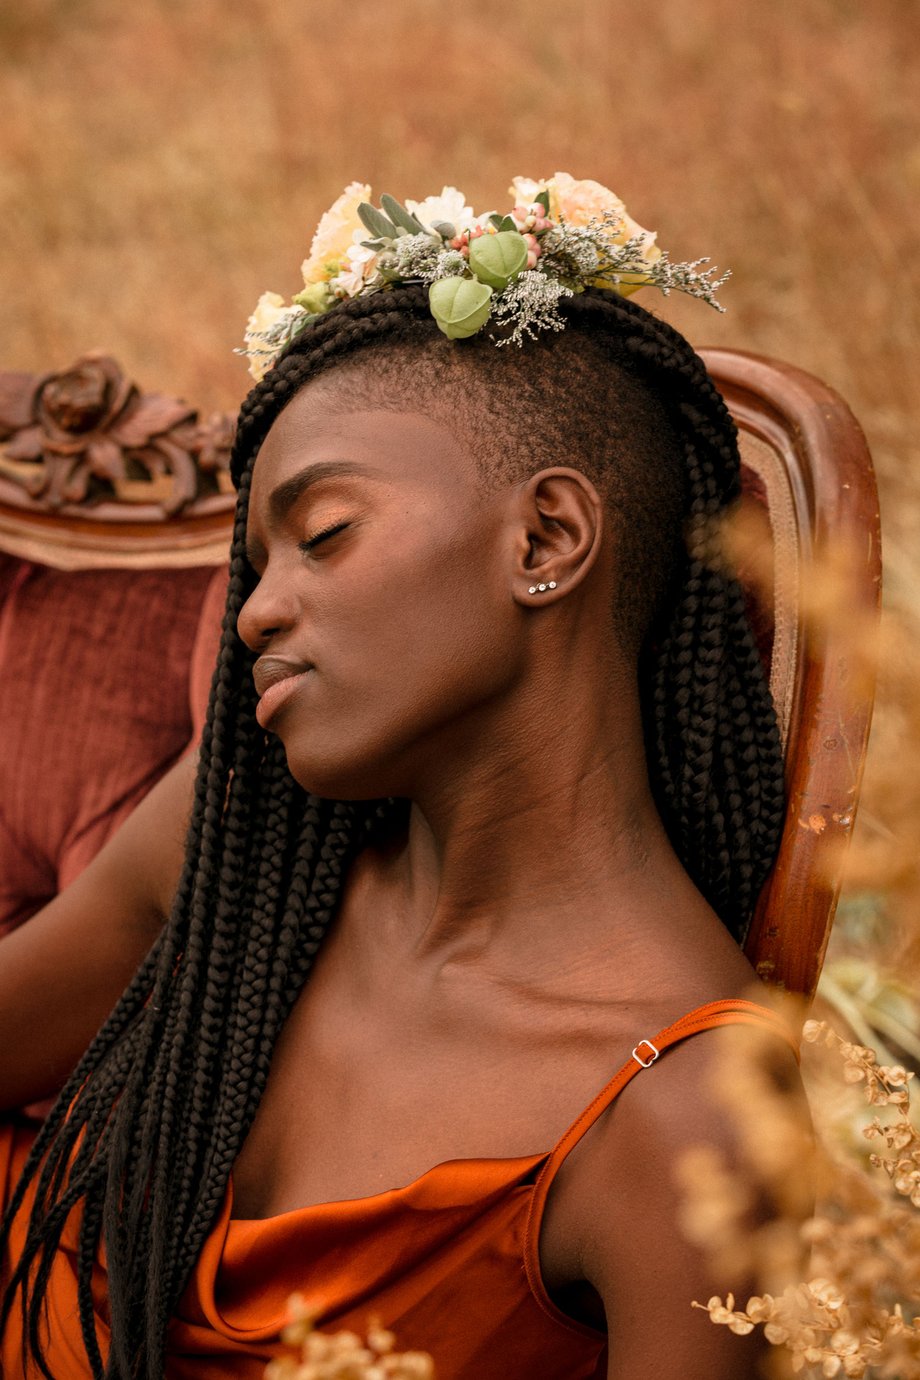 Jesse Cornelius's image of a Black woman with her eyes closed for Solmonson Farm model